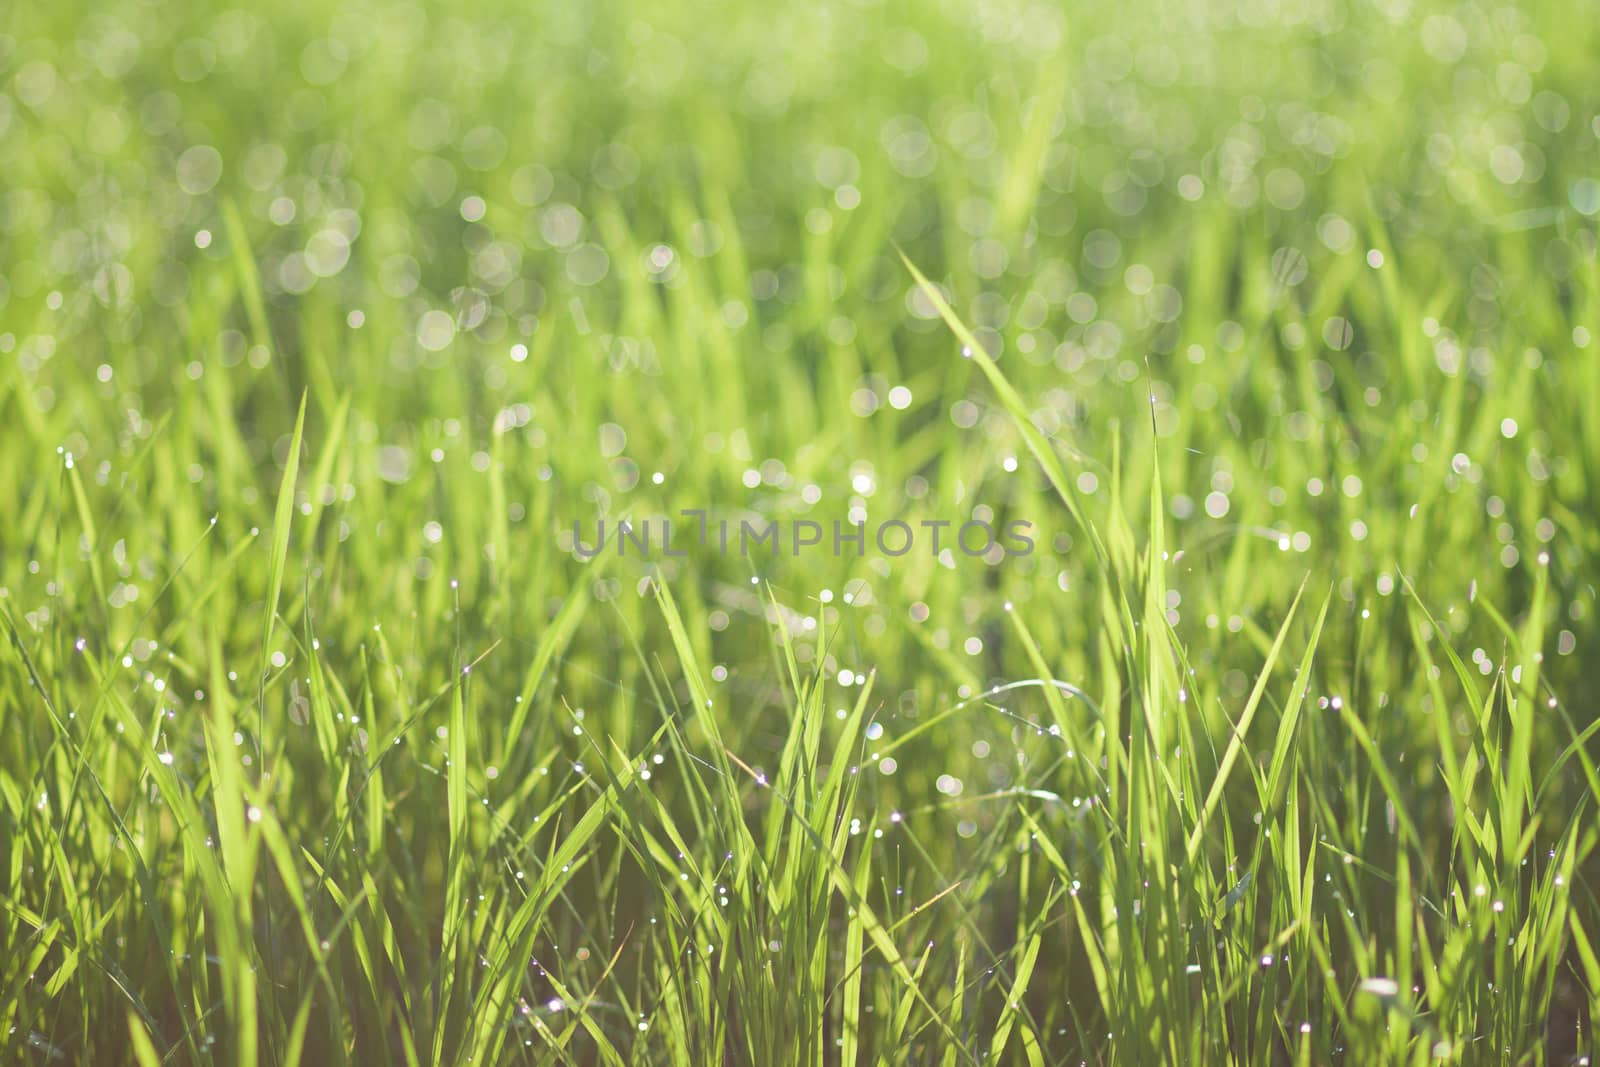 Water drops on the green grass by kritsada1992